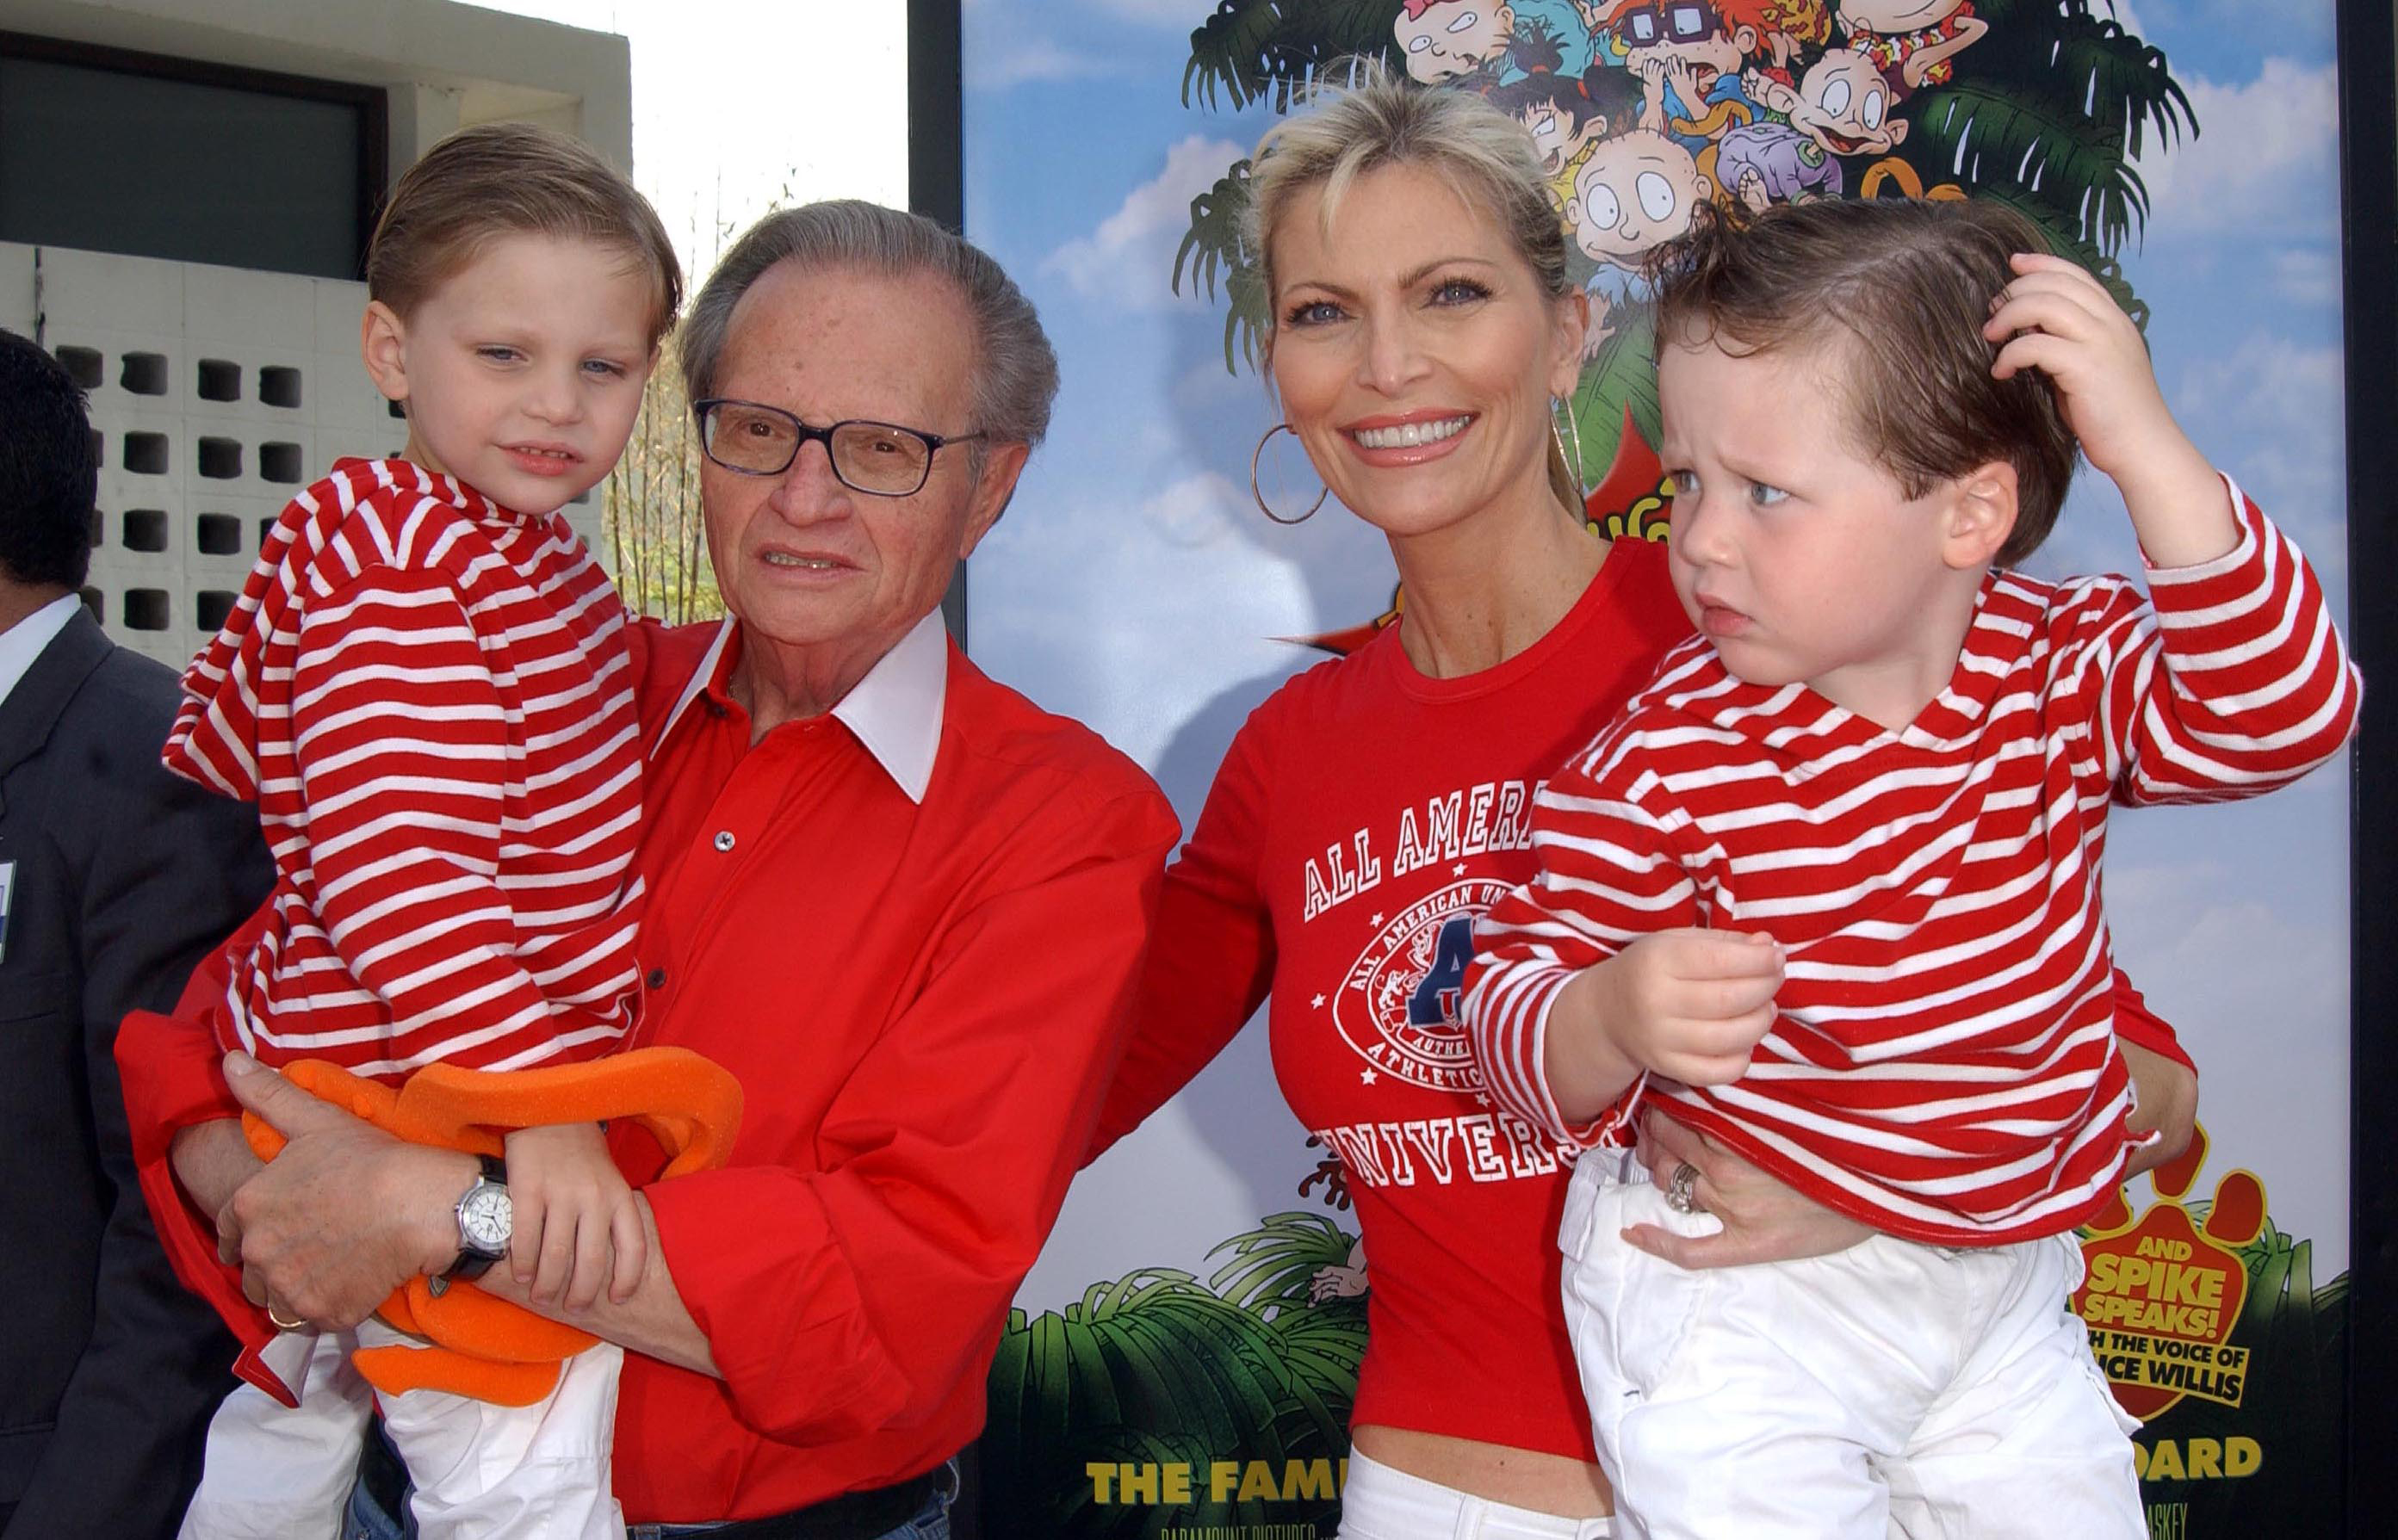 <p><a href="https://www.wonderwall.com/celebrity/hollywood-reacts-to-larry-kings-death-420022.gallery">Late, great broadcasting legend</a> Larry King and seventh wife Shawn Southwick King enjoyed a family day out with their two boys -- Chance, then 4, and Cannon, then 3 -- at the premiere of "Rugrats Go Wild" in Hollywood in June 2003. Keep reading to see Larry's handsome boys as men today...</p>